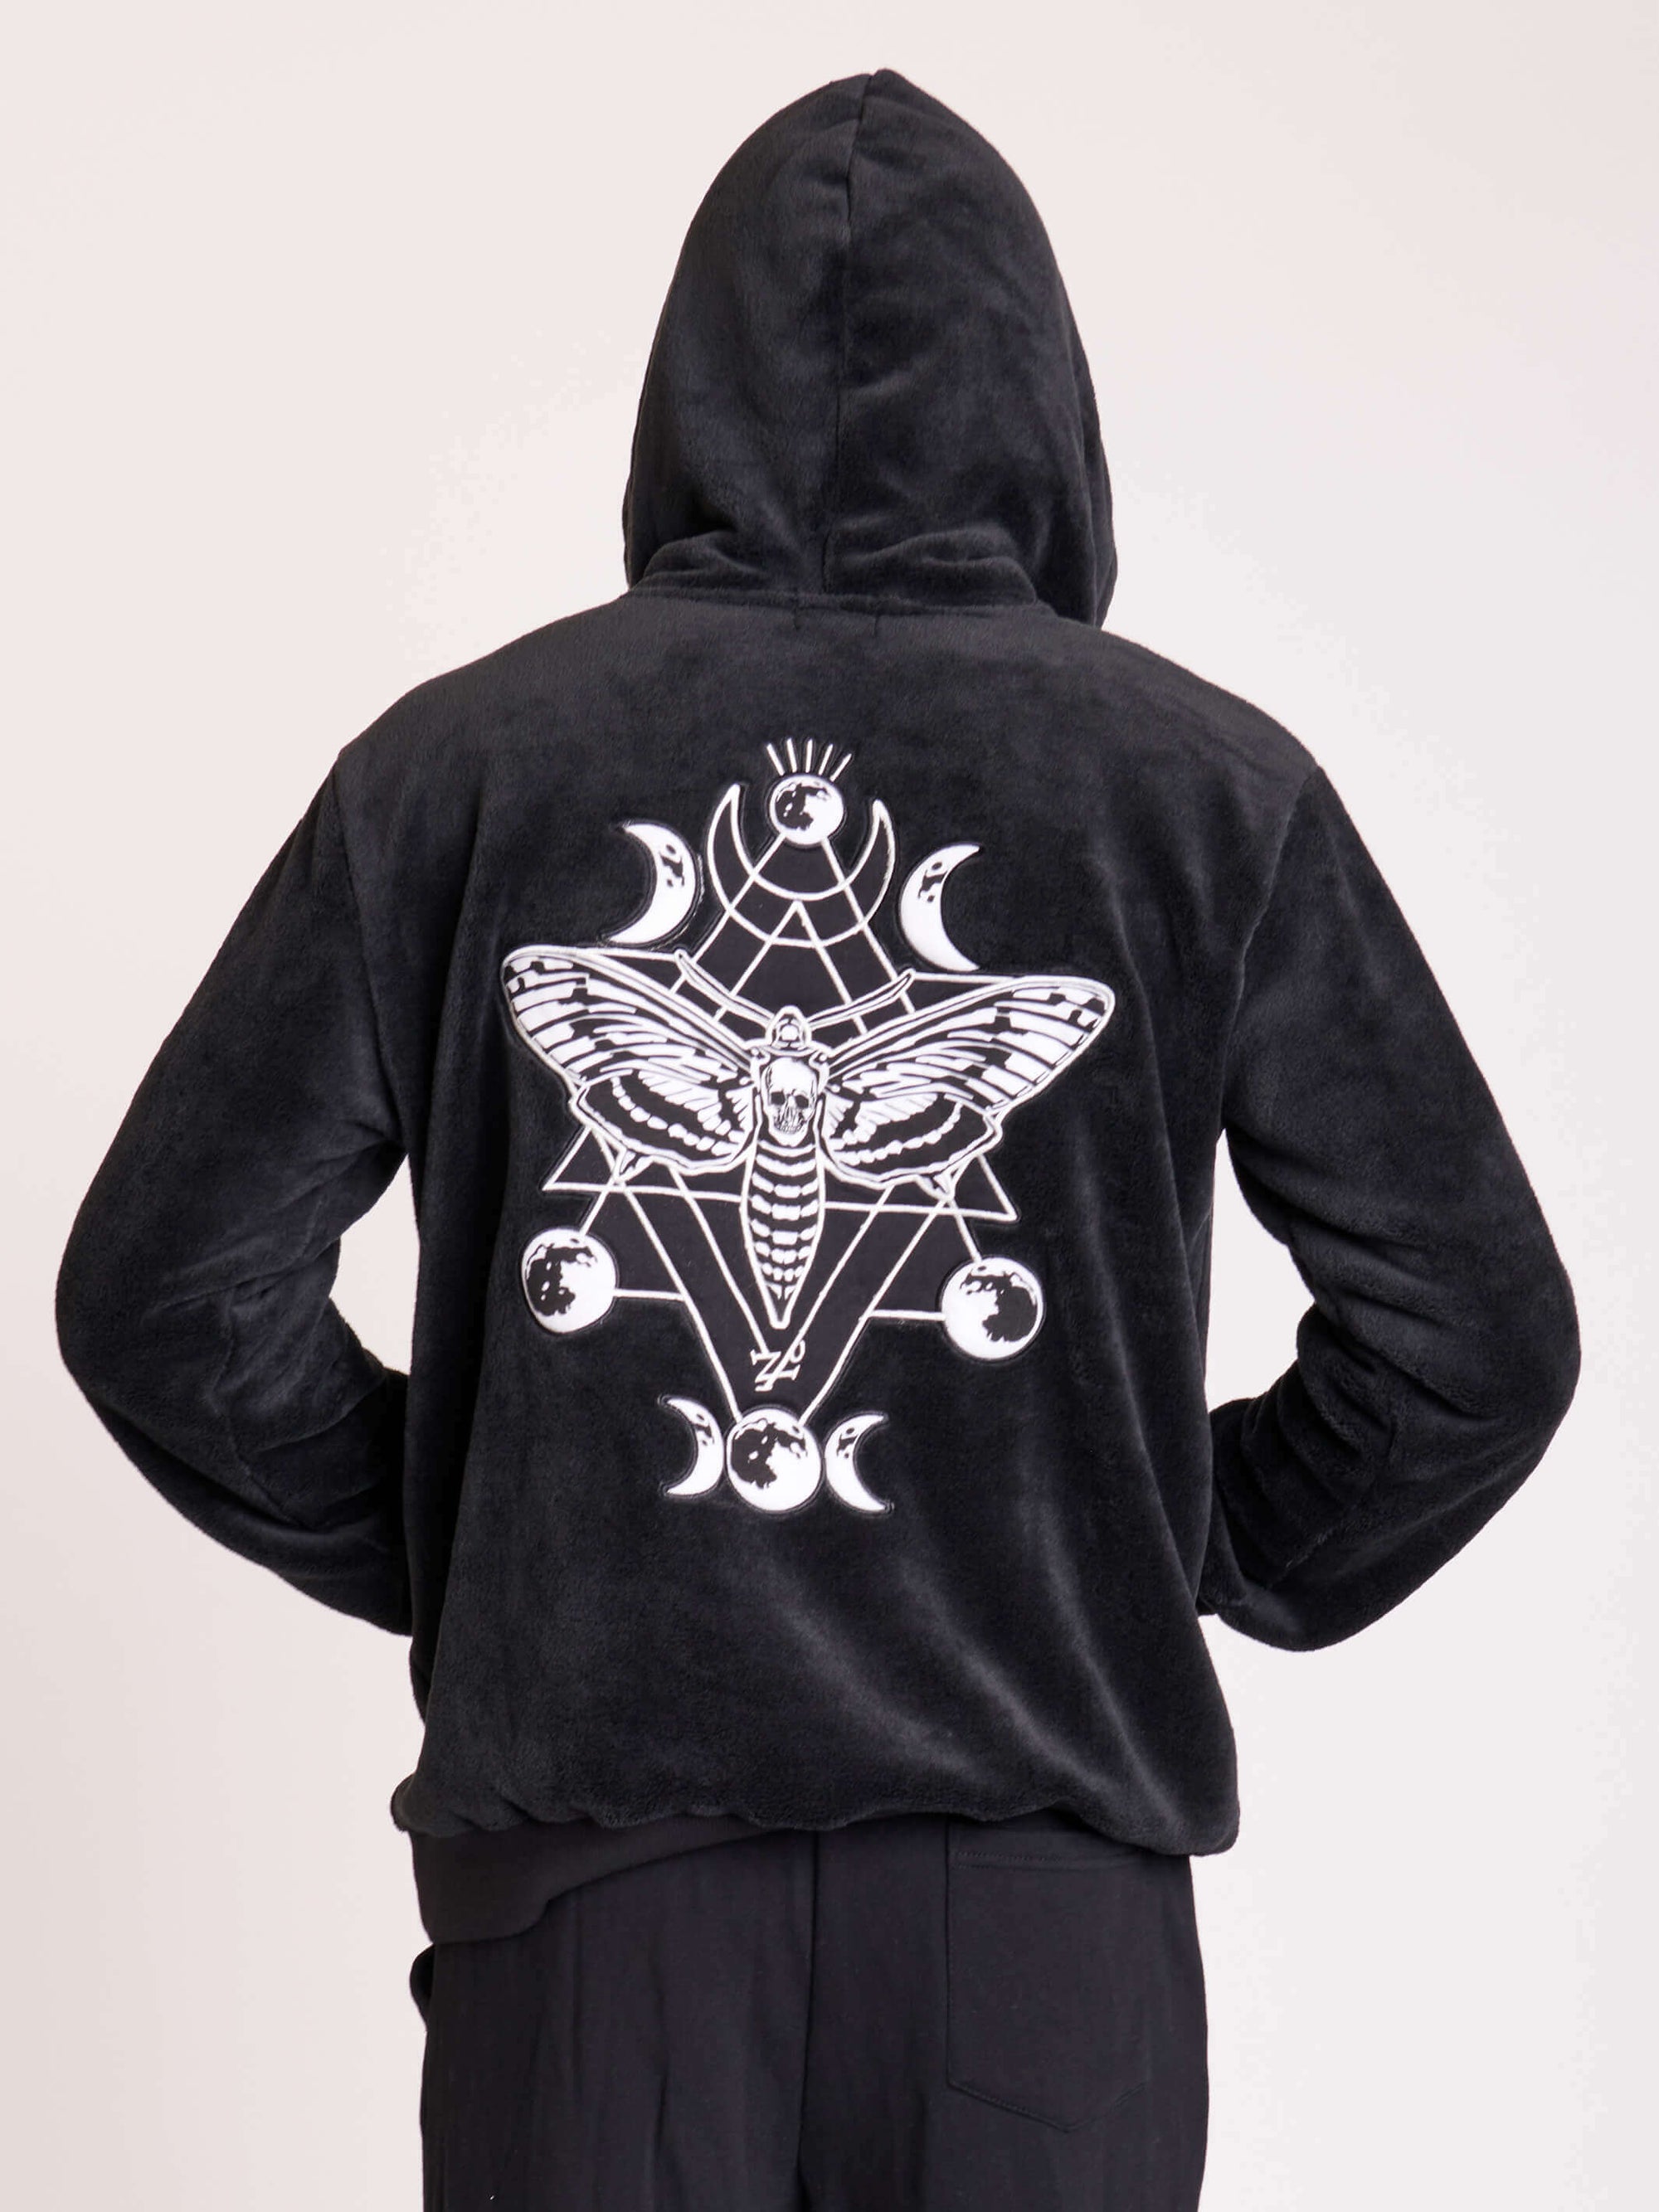 Plush black hoodie with large deathmoth patch on back